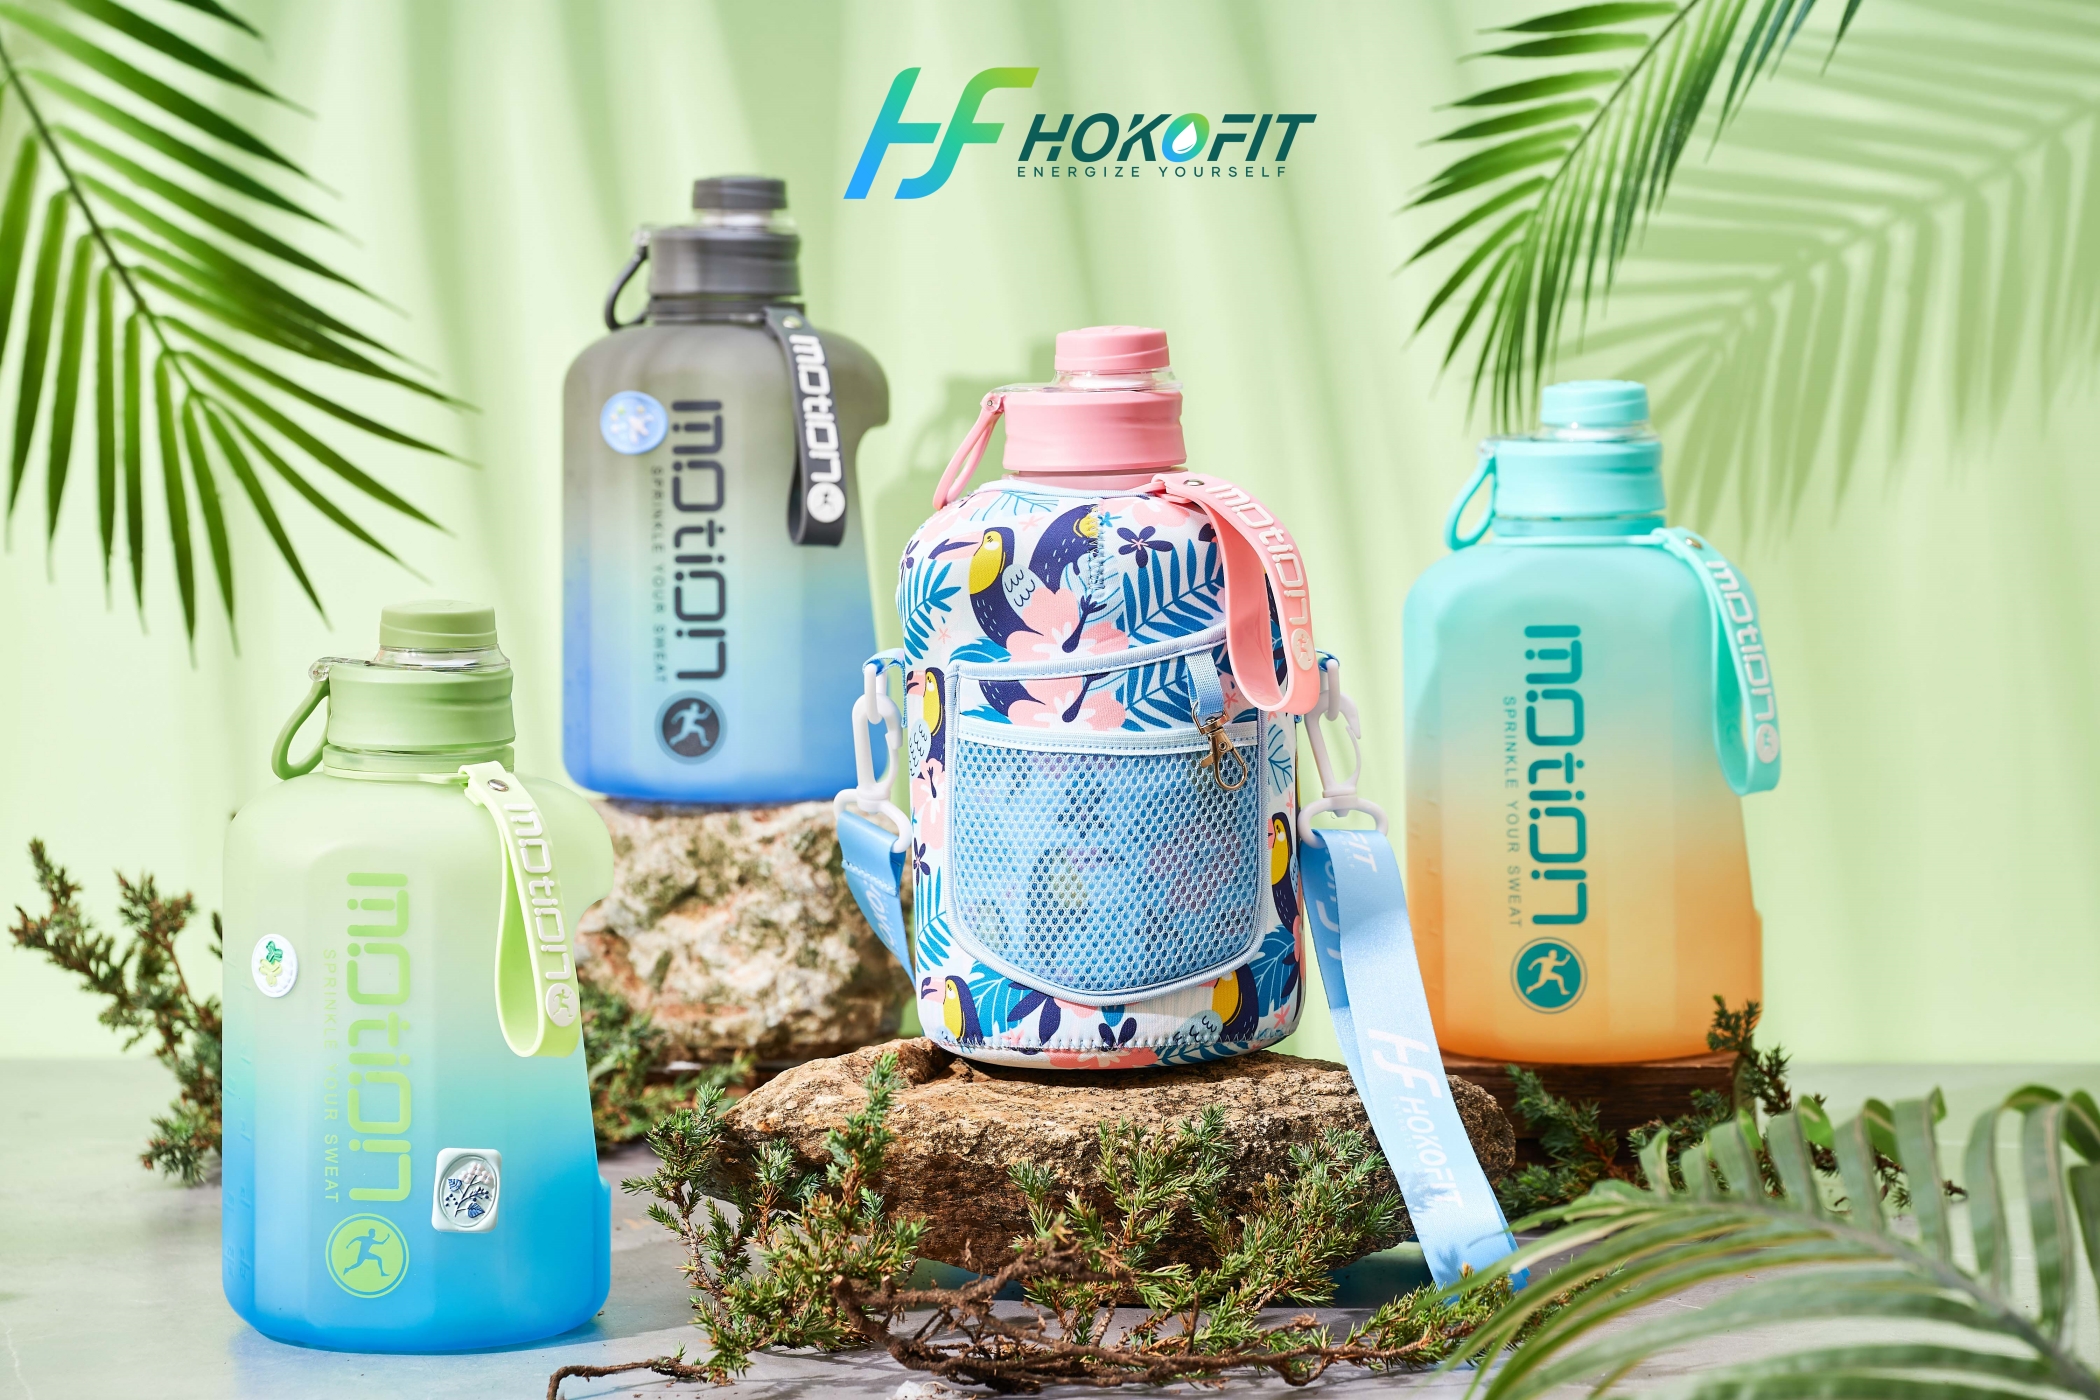 Thehokofit Launches Its New 72oz Water Bottle - The Perfect Way to